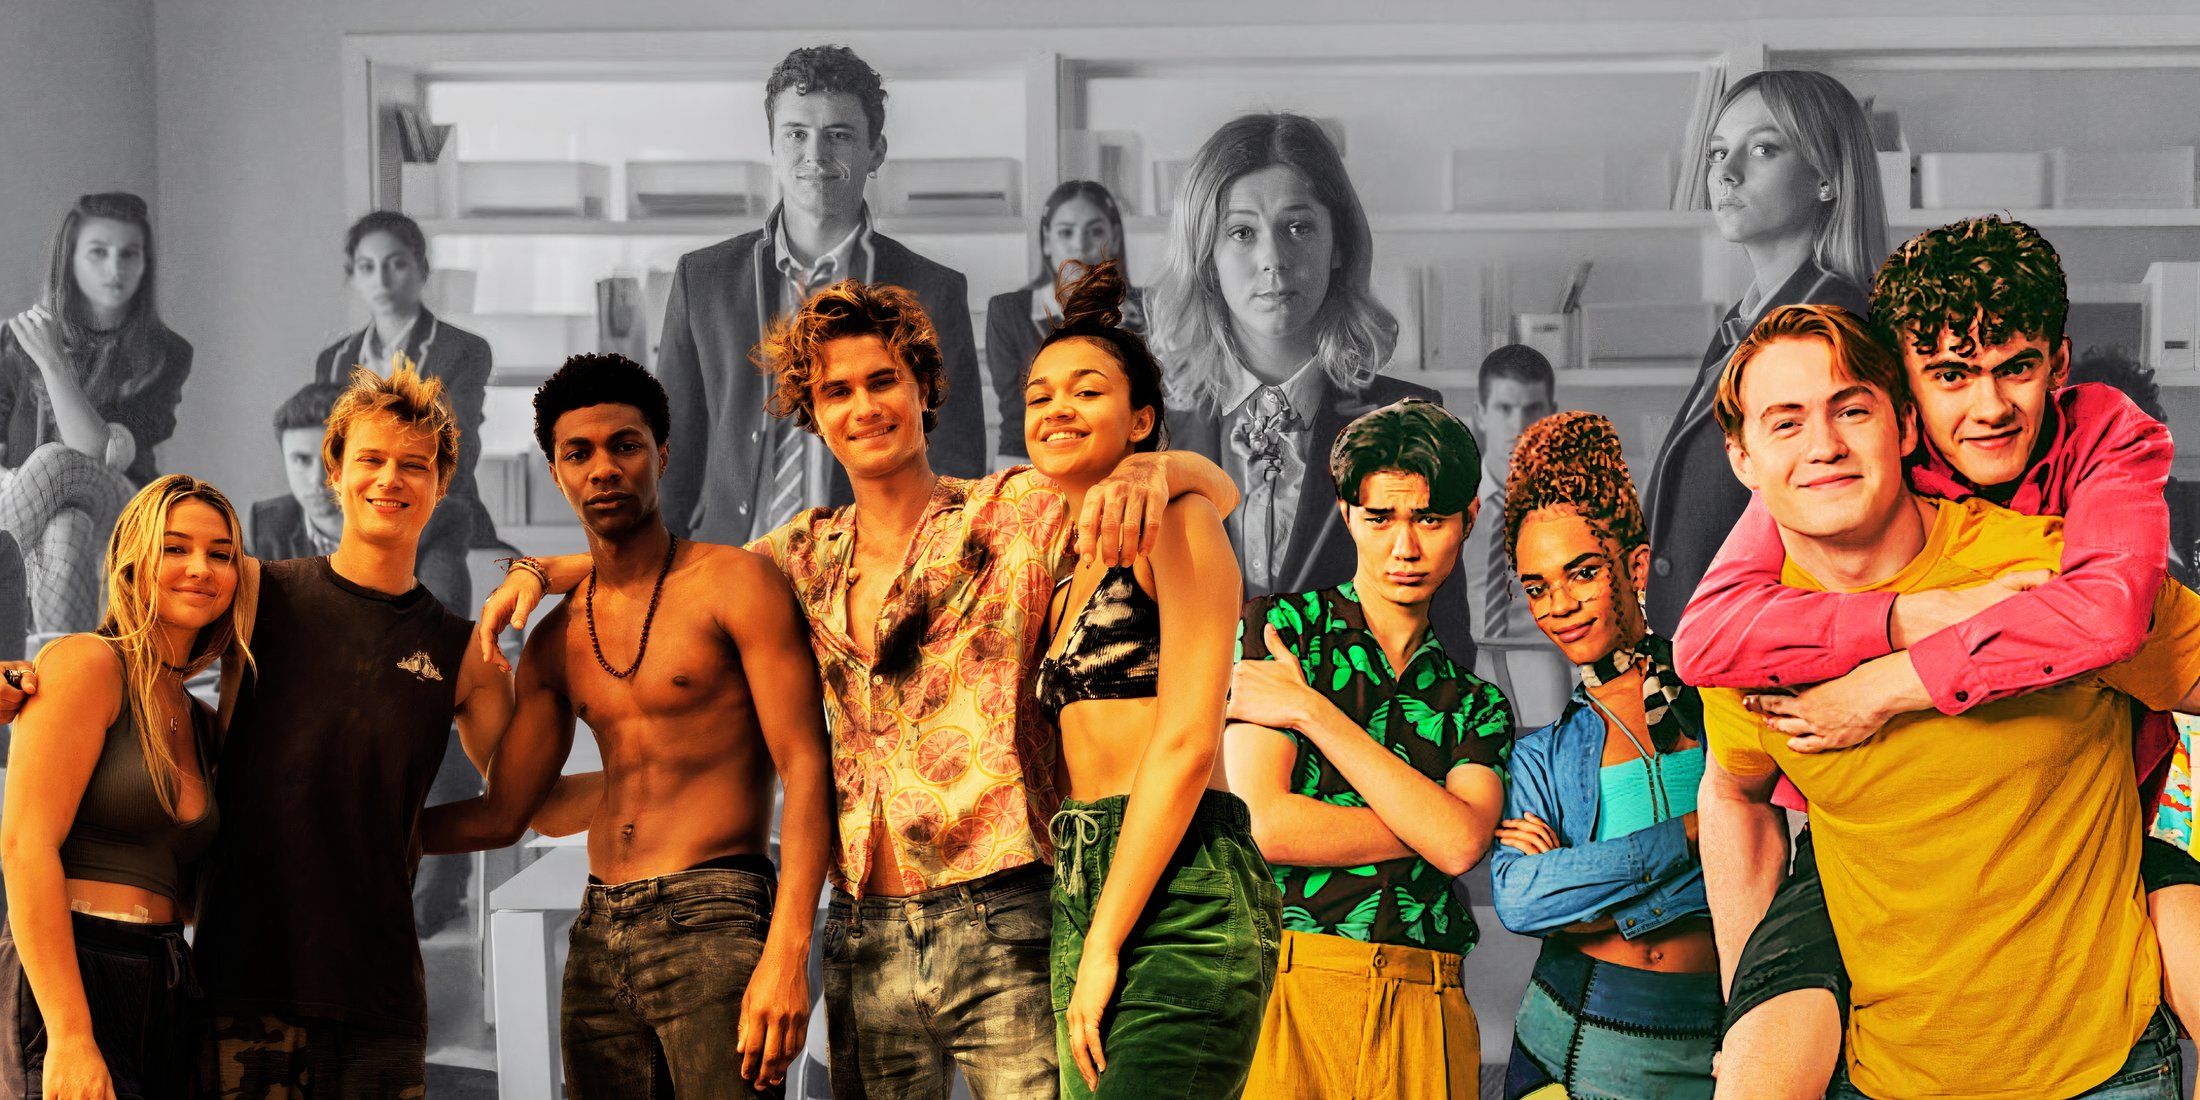 A blended image features the cast of Elite in the background with the casts of Outer Banks and Heartstopper in the foreground